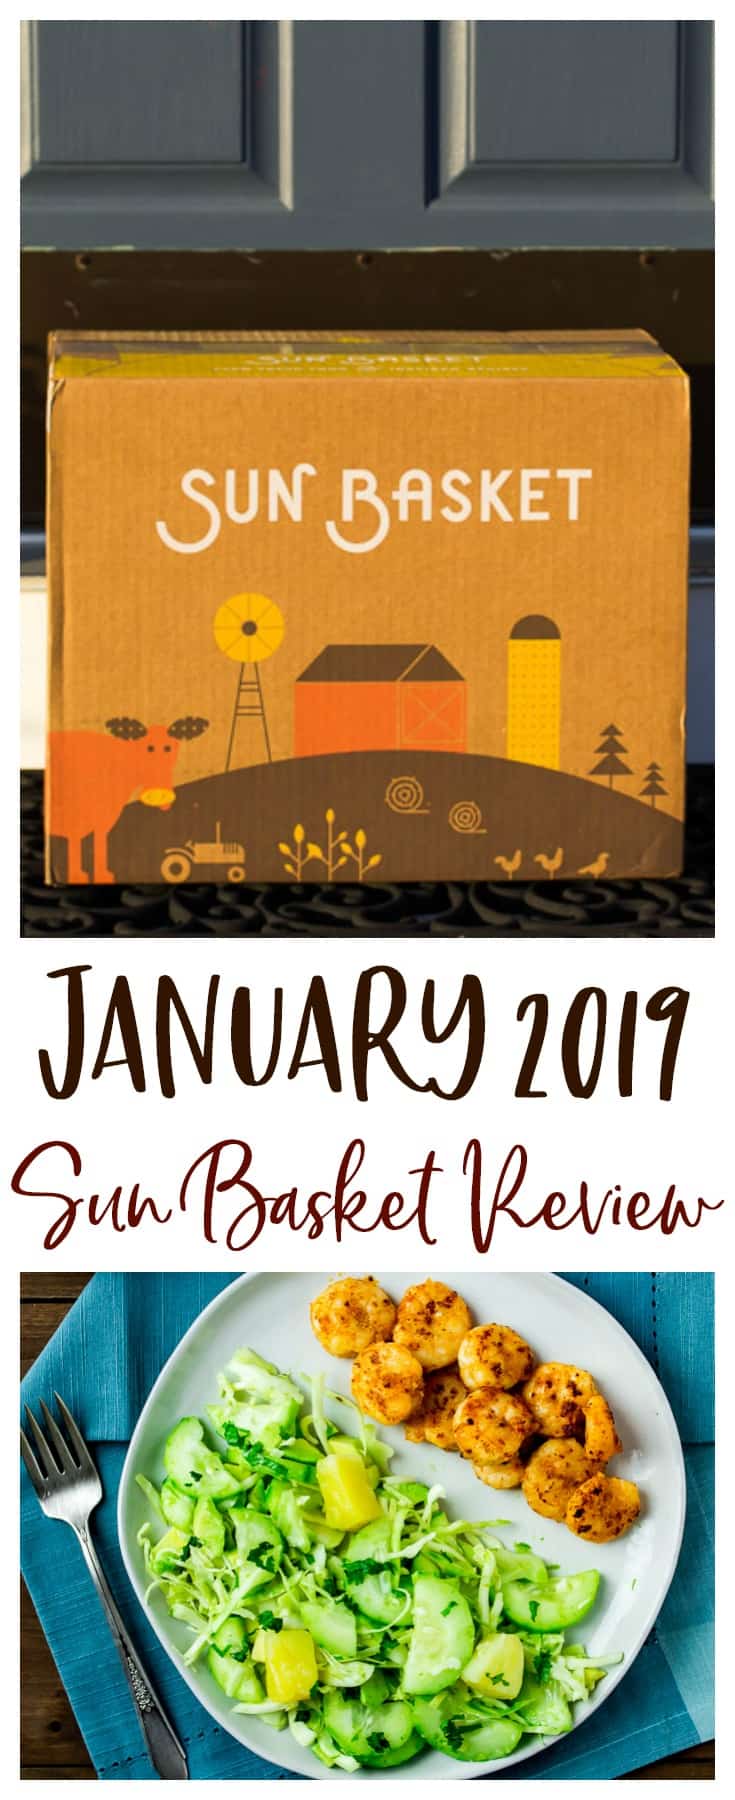 January 2019 Sun Basket Review - get all the details on this meal kit subscription box and a review of the 3 healthy recipes that I tried! PLUS the best deal available for 1st time subscribers! | #ad #sunbasket #sunbasketmeals #2019sunbasket #organic